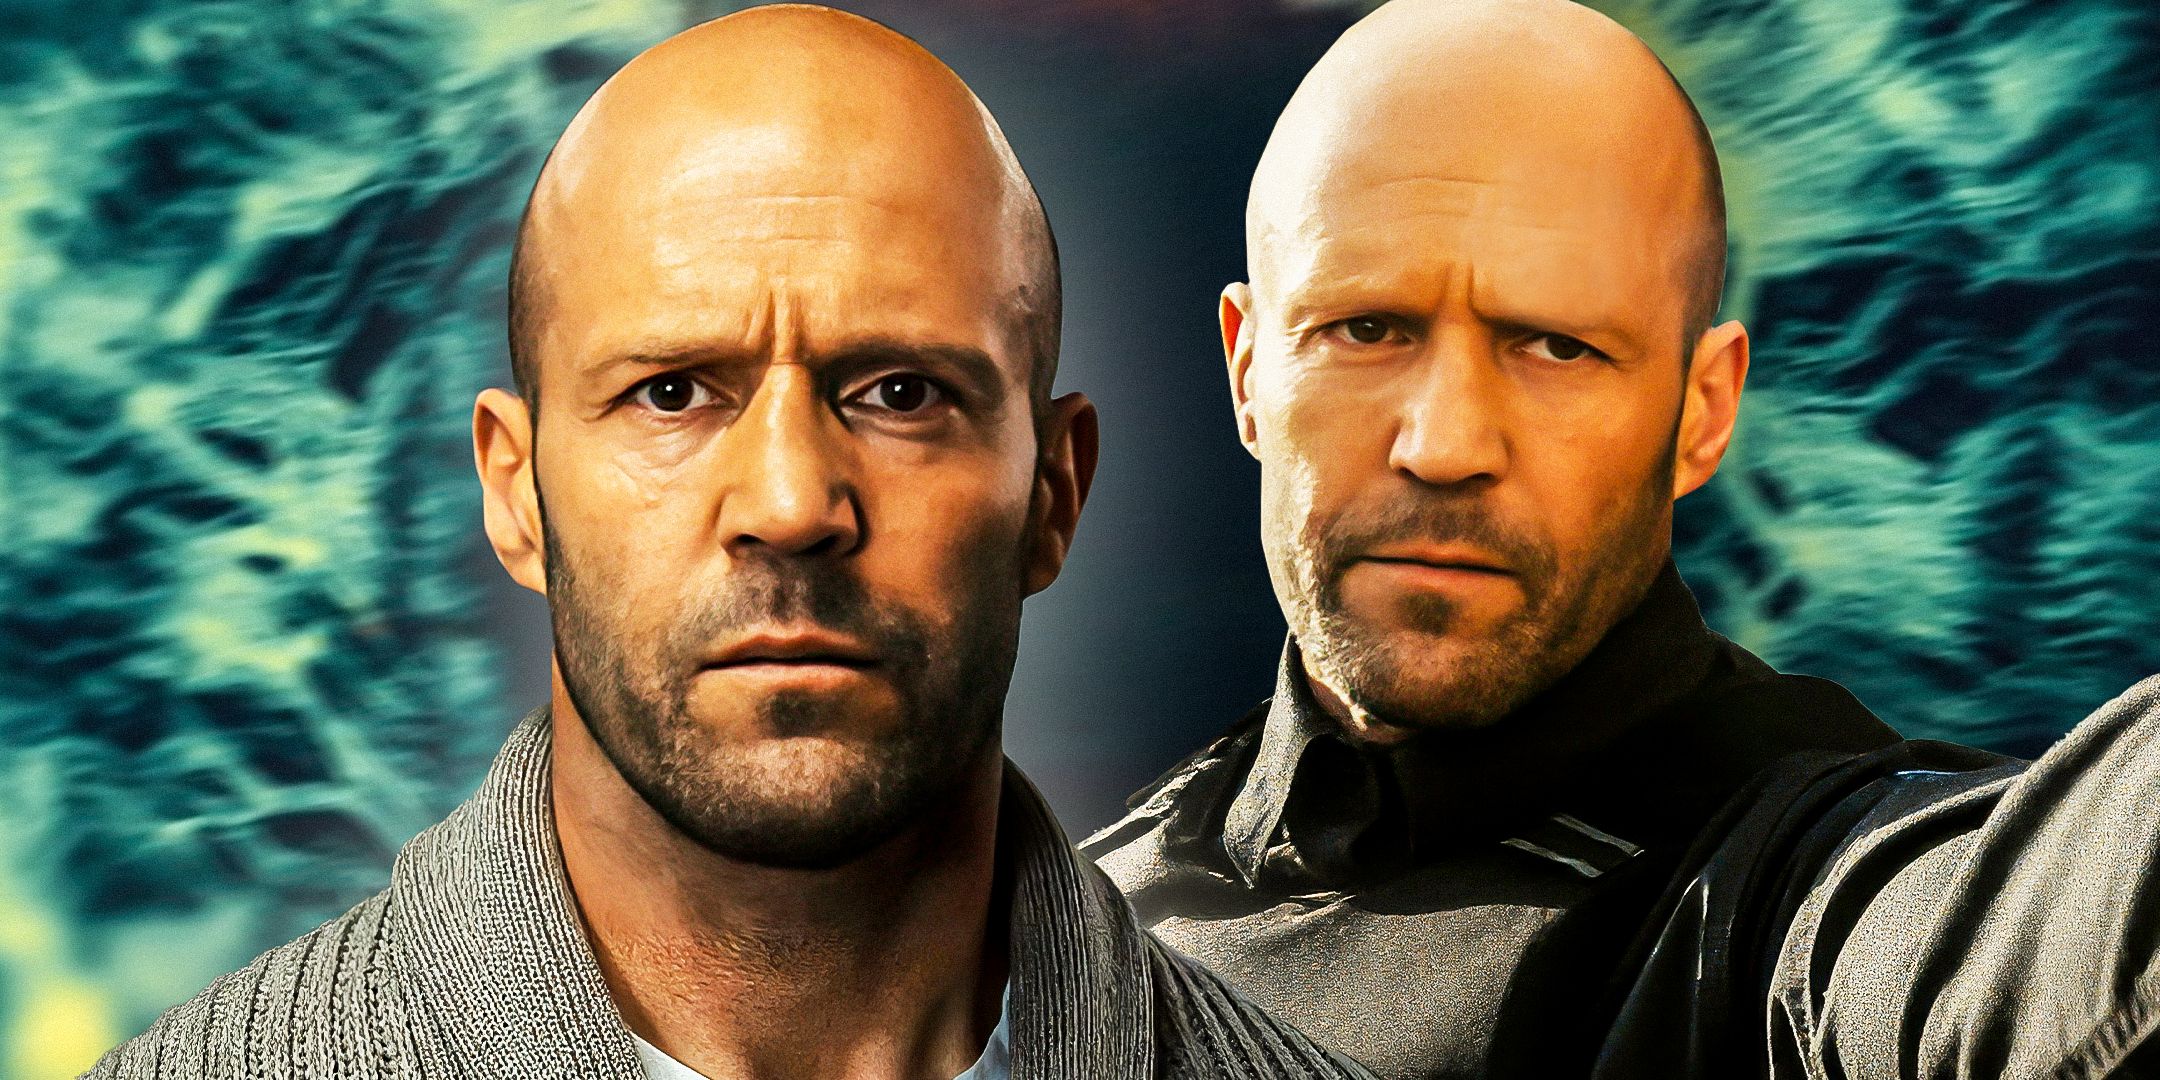 Jason-Statham-as-H-from-Wrath-of-Man-1